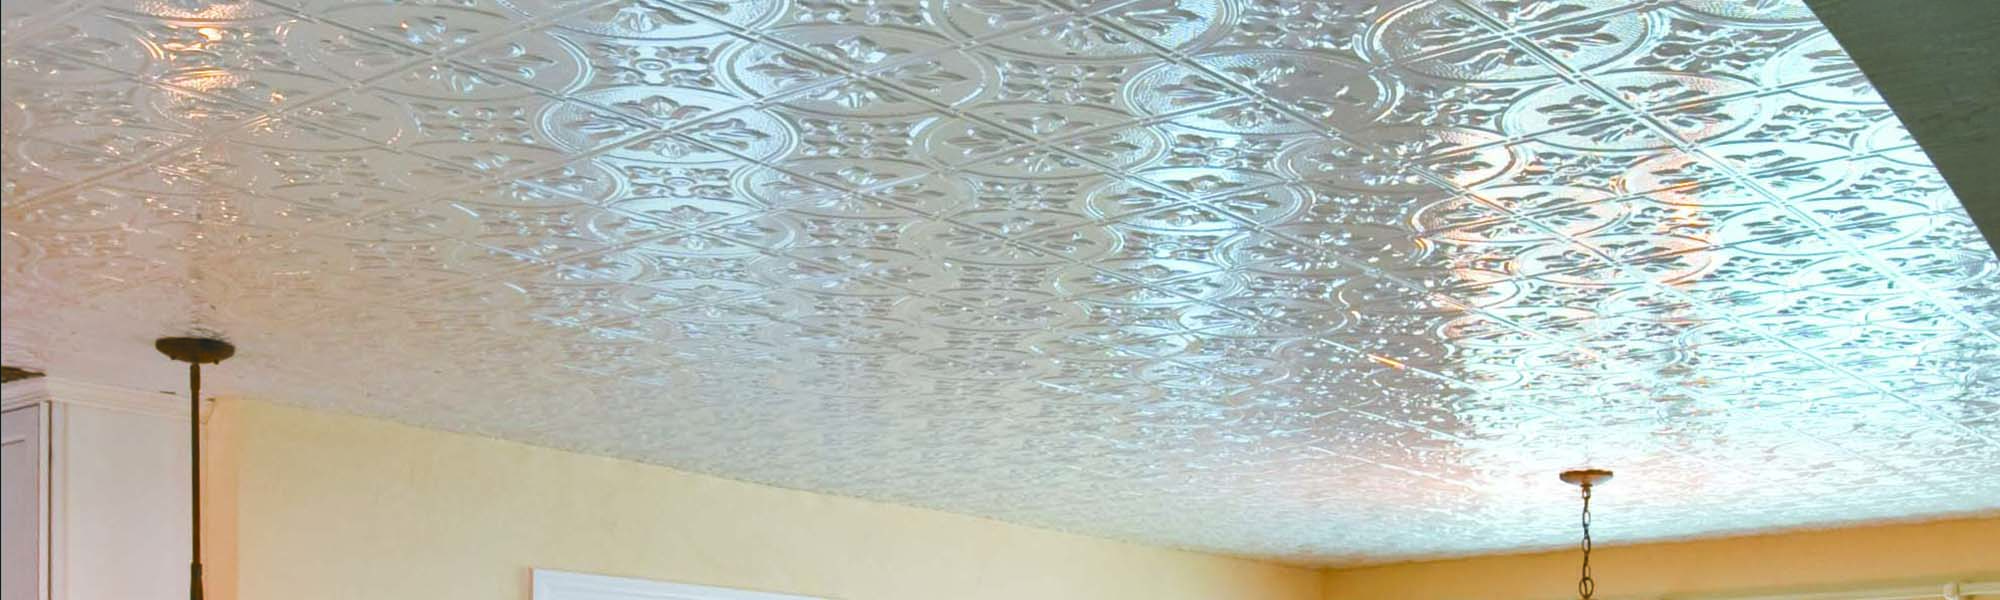 https://www.surfacematerials.com/media/catalog/category/CEILING_BALTIMORE-WHITE-PAINTABLE_copy.jpeg